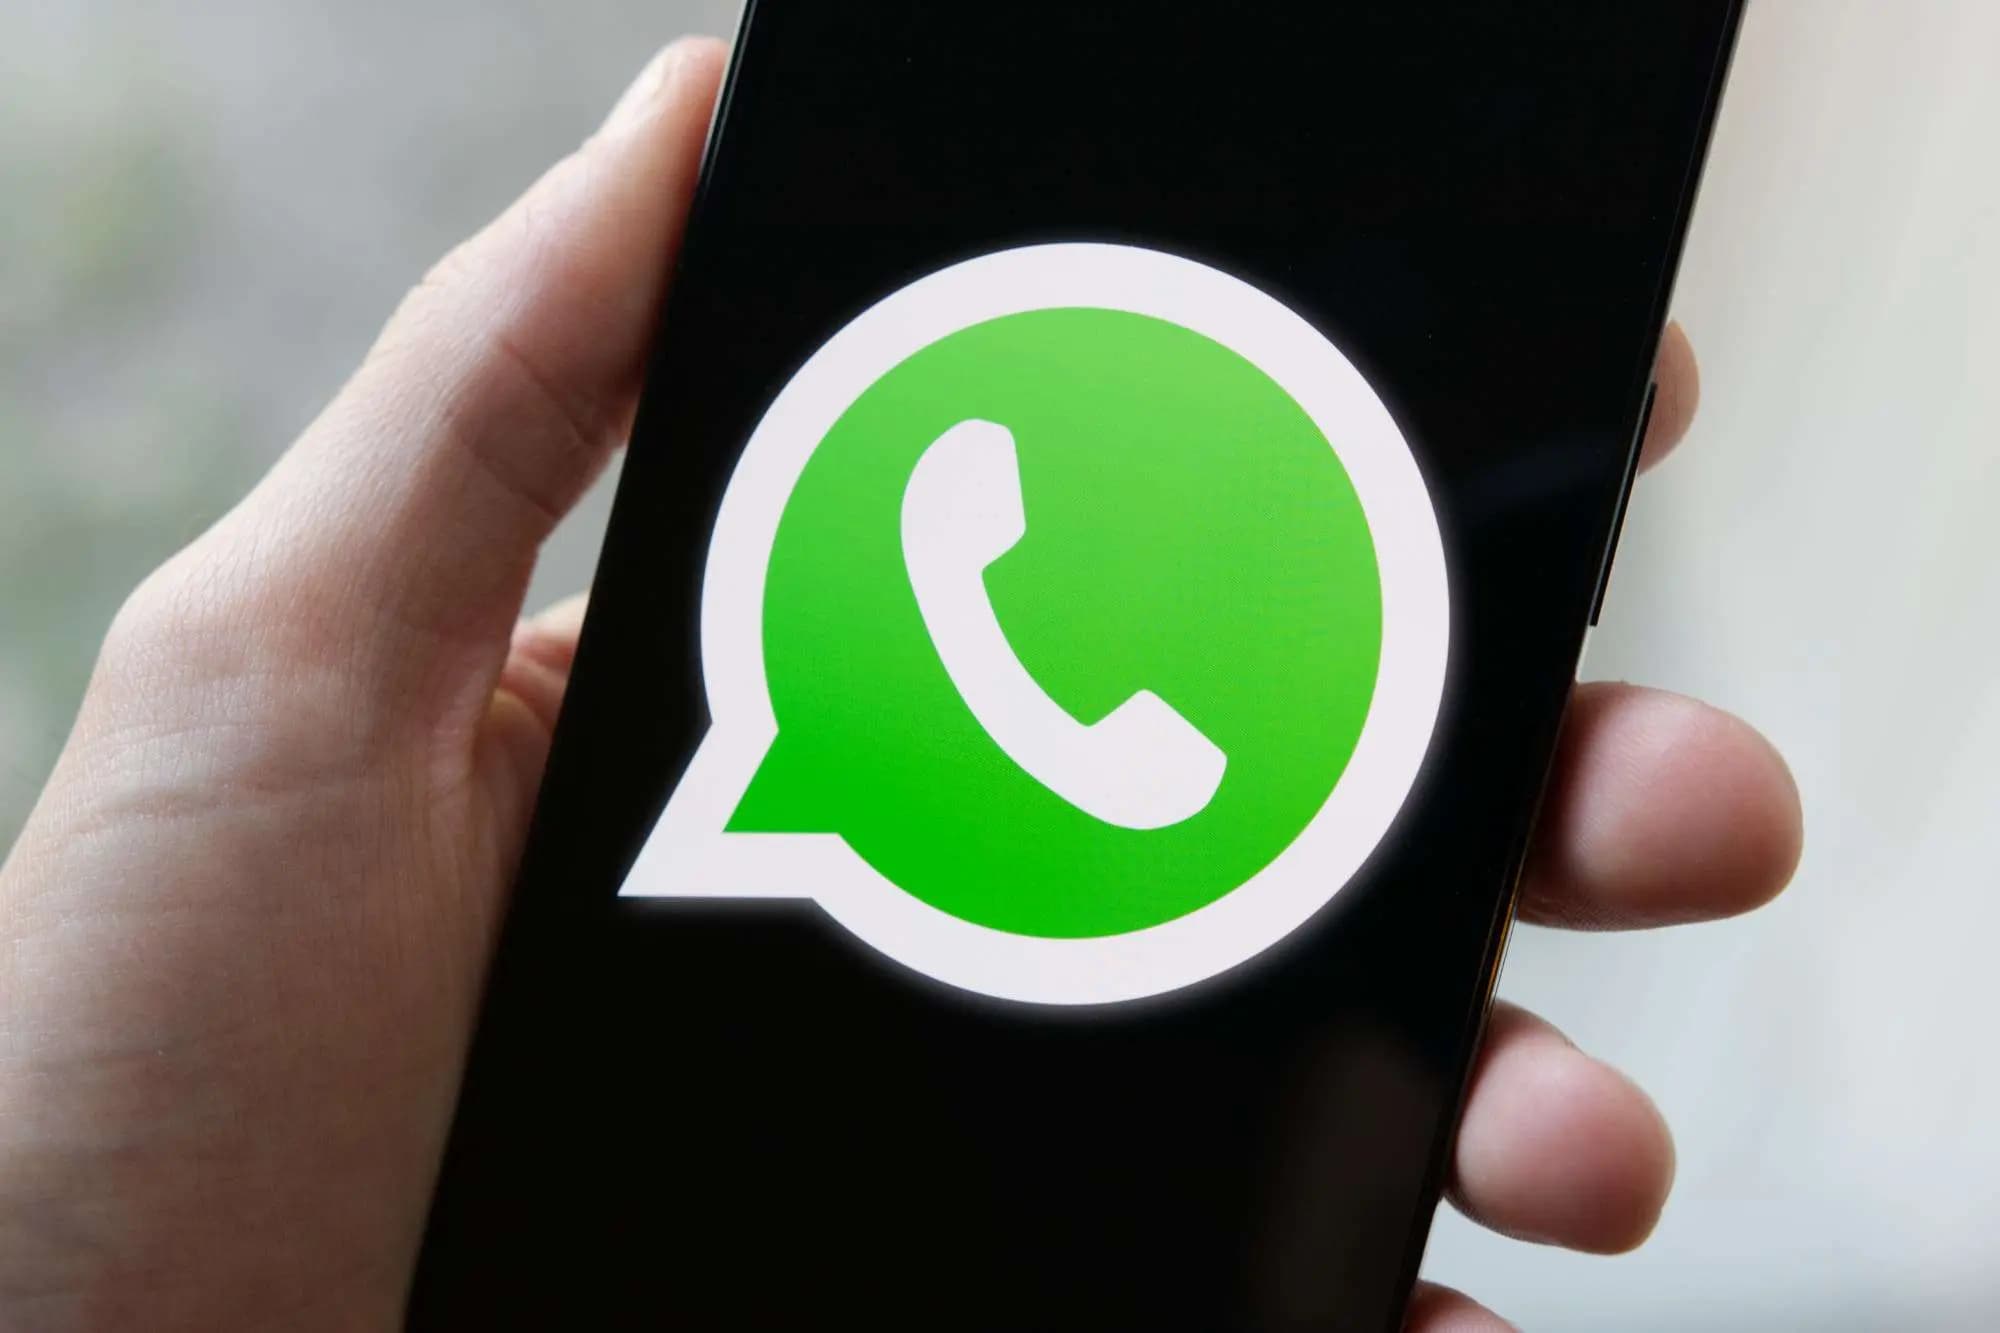 WhatsApp backup via Google will change: This is important to know